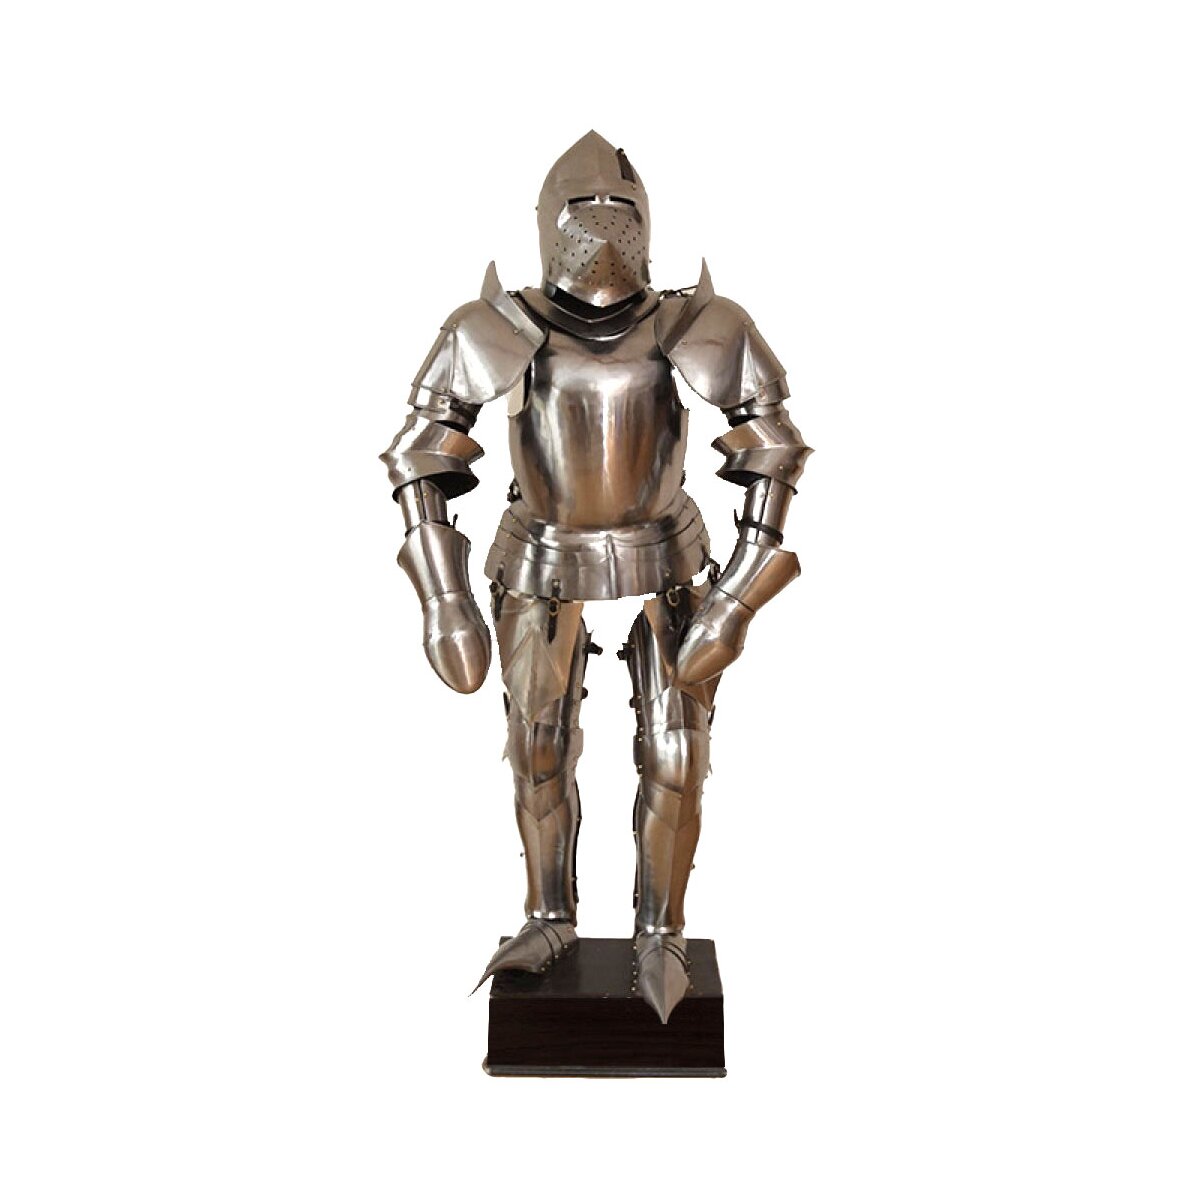 Late Medieval Suit of Armour